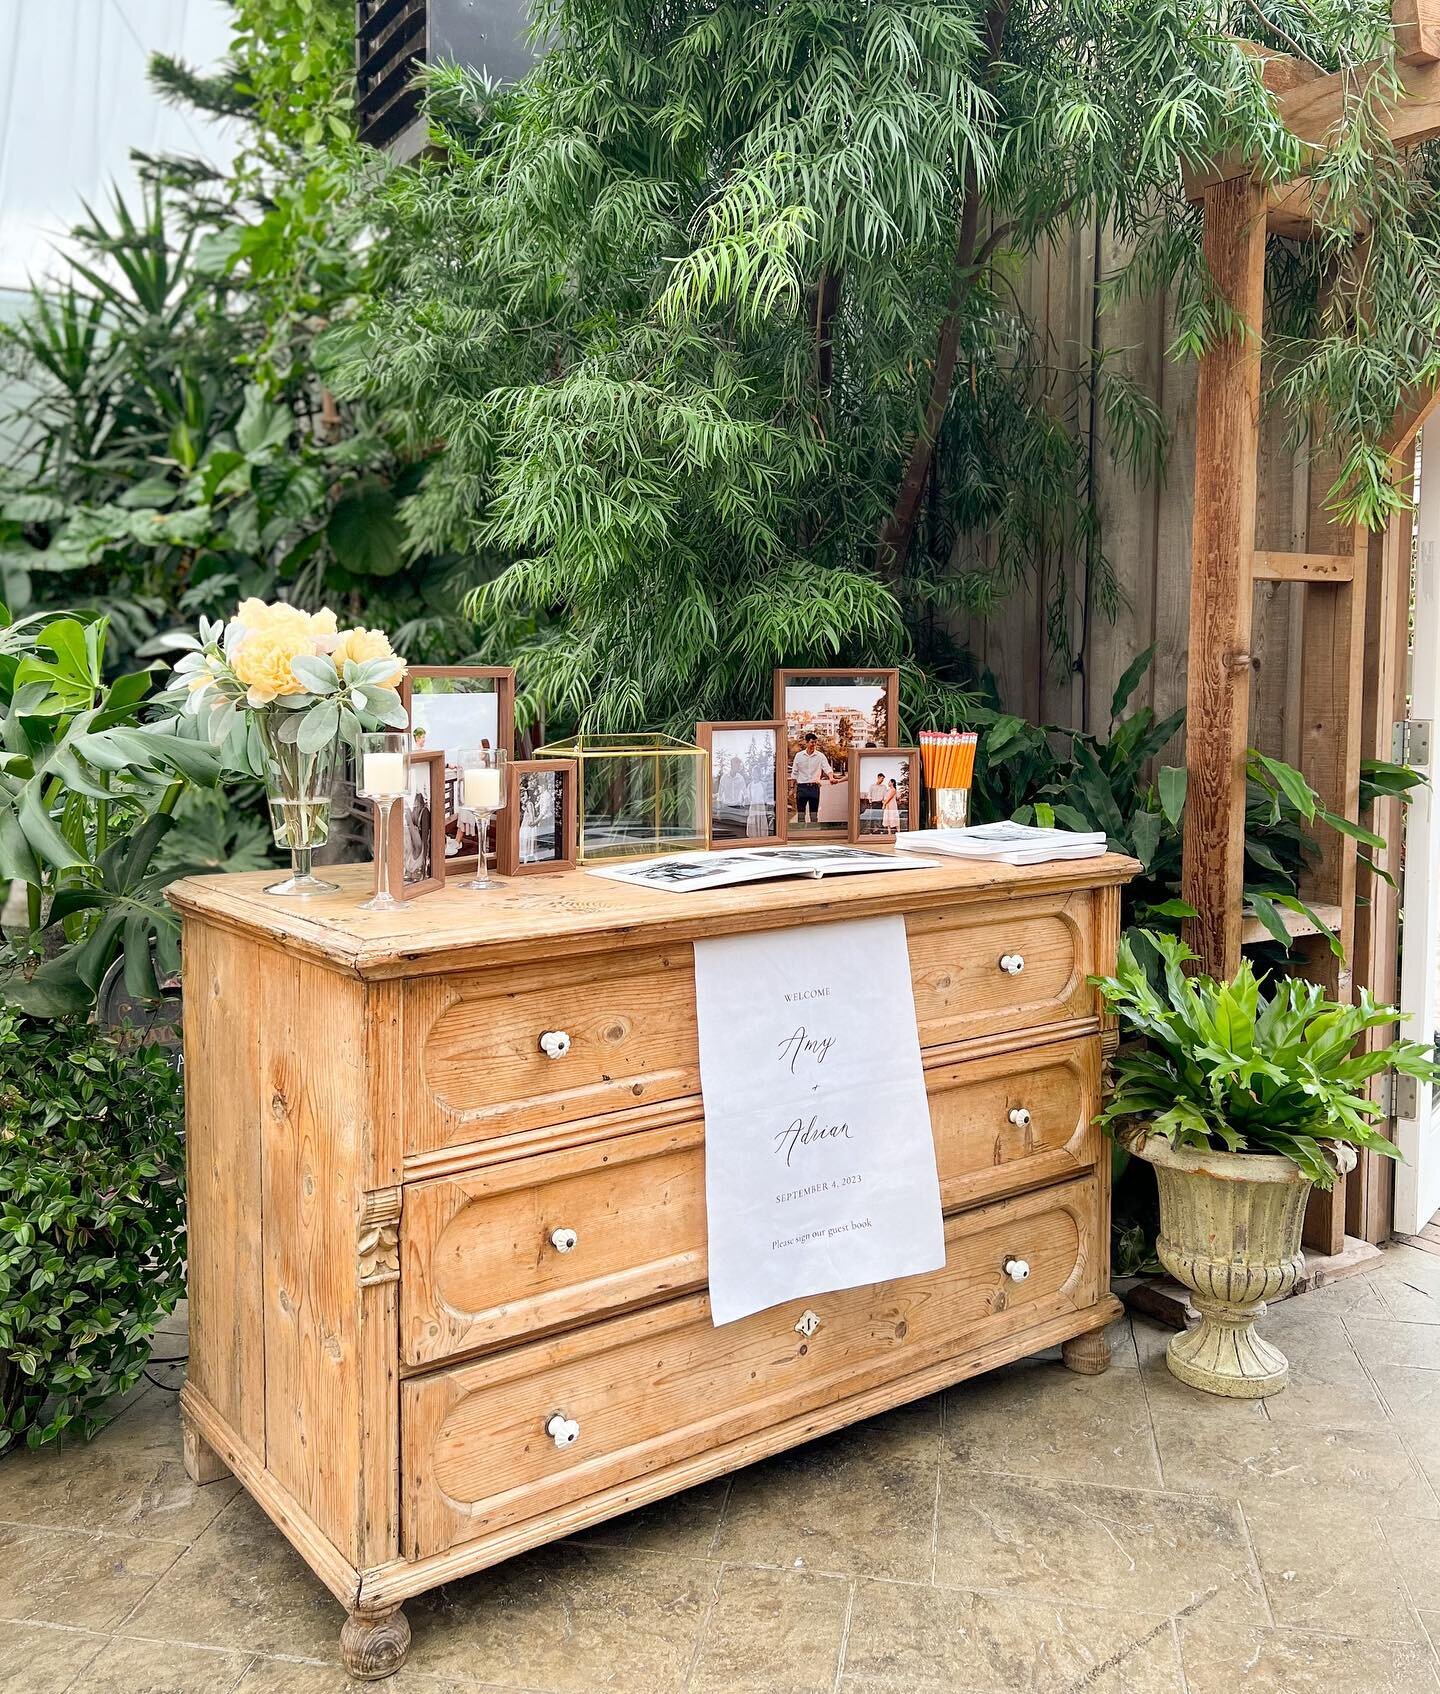 Spent the long weekend on a&hellip; wedding decor team?! Not my usual gig haha! 😜 

Got to attend a beautiful rustic wedding of some dear friends and helped set up the venue :) This antique dresser belonged to the venue and served as the reception t